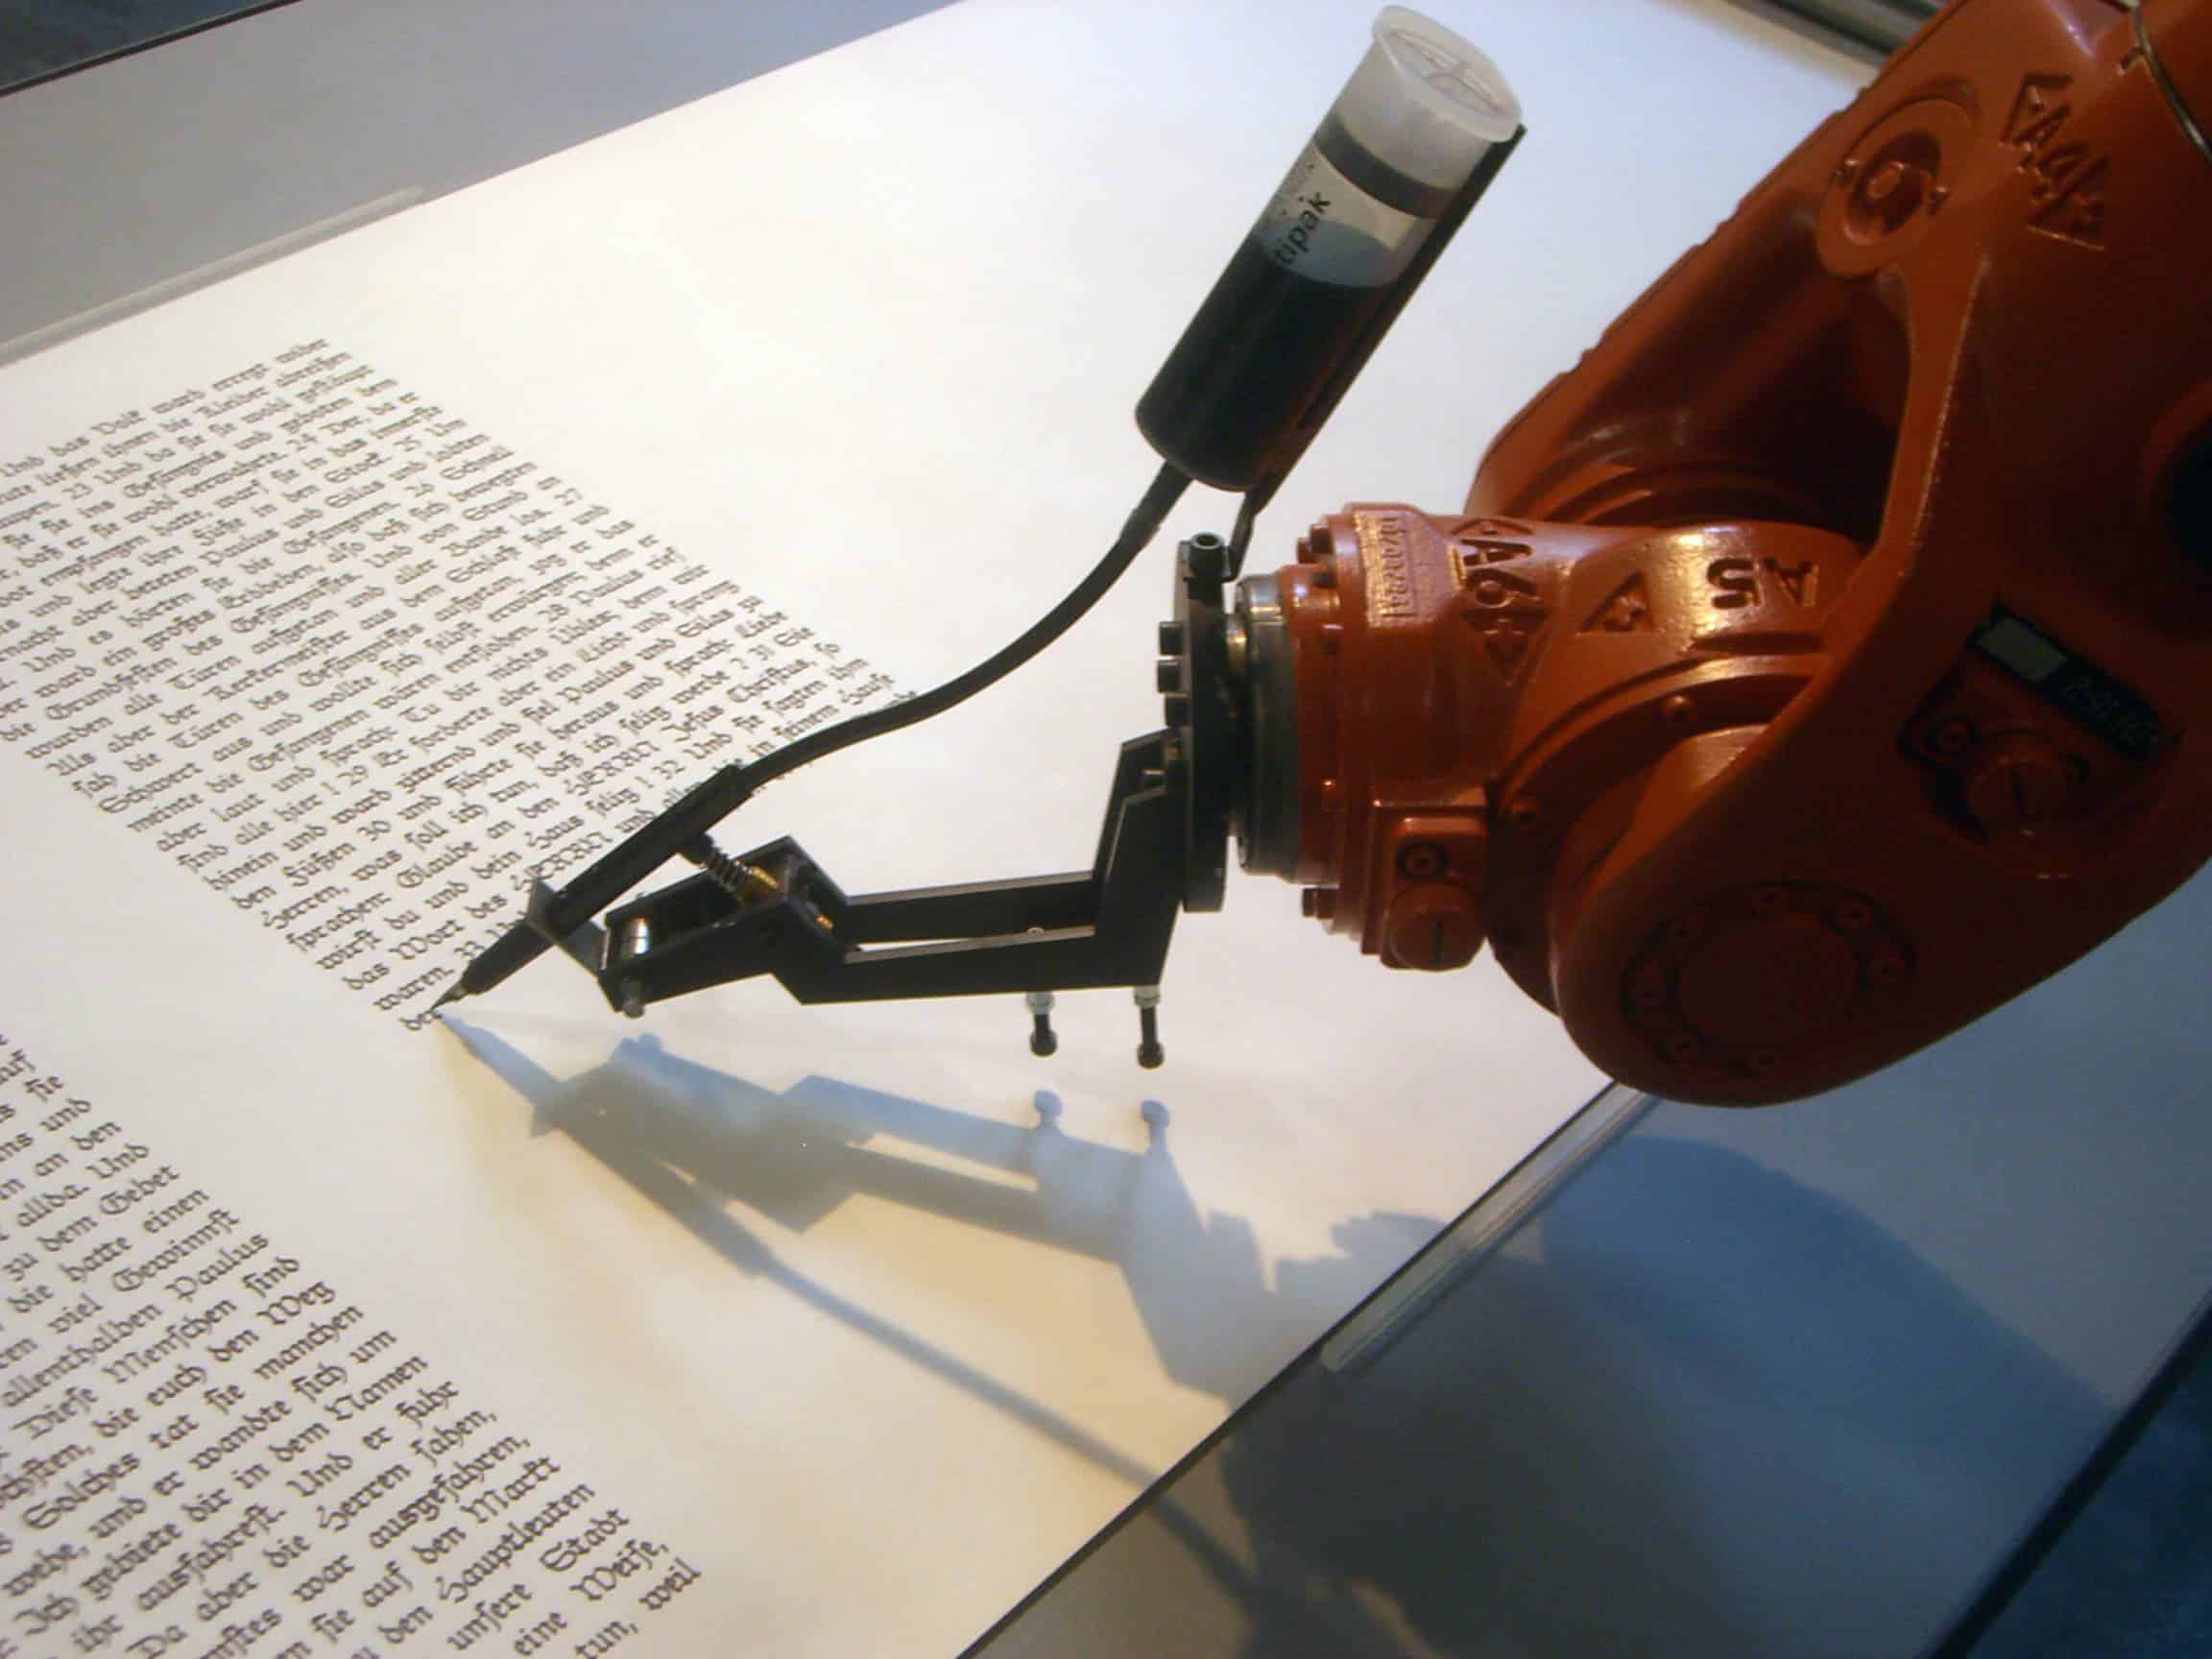 Could robots be taking over writing? Photo taken in the ZKM Medienmuseum, Karlsruhe, Germany.